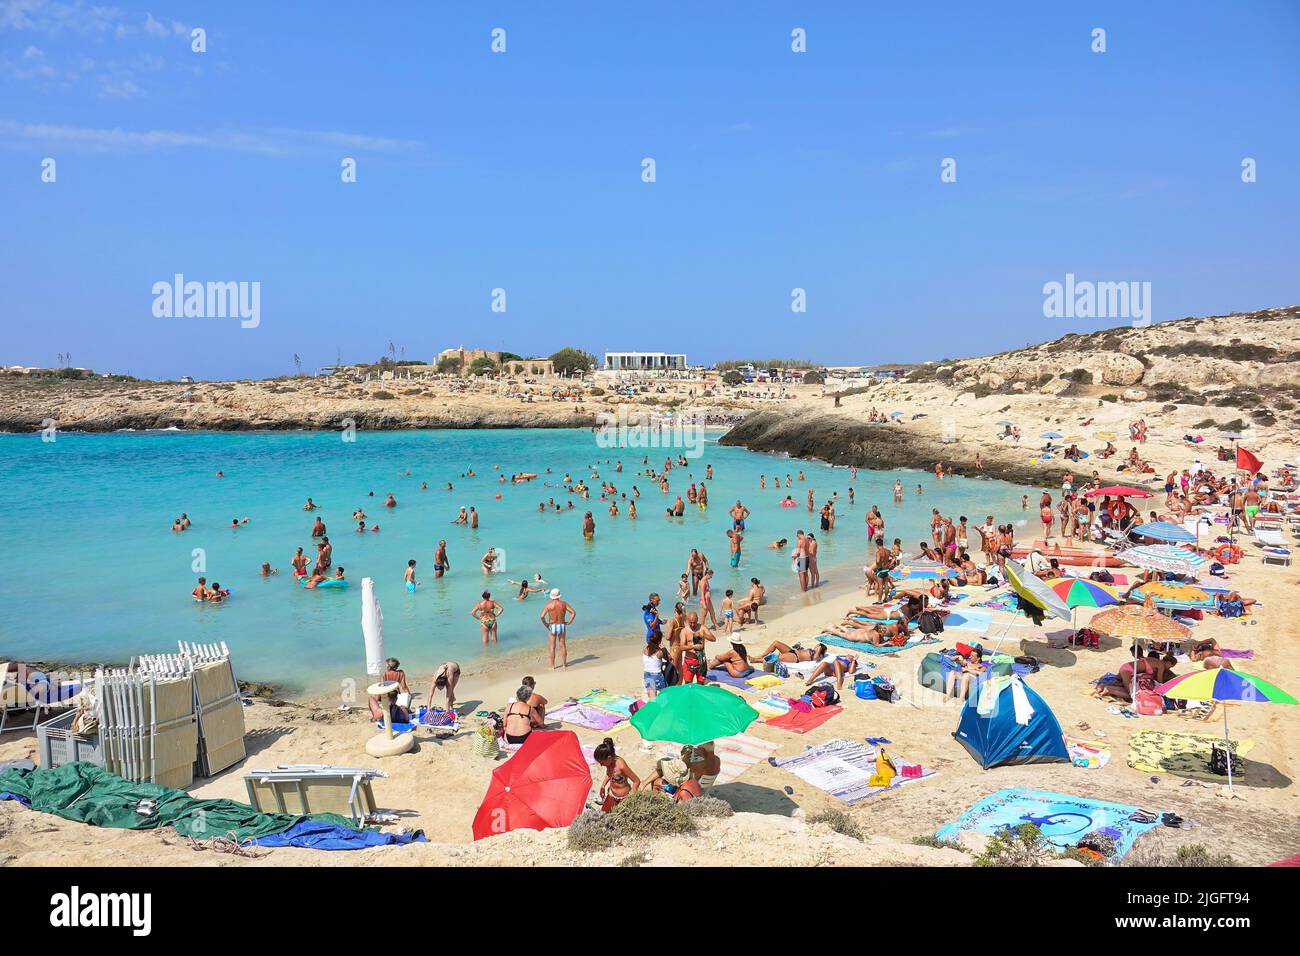 View of the coast of Lampedusa island sea paradise for yachts and swimmers. Lampedusa, Italy - August 2019 Stock Photo